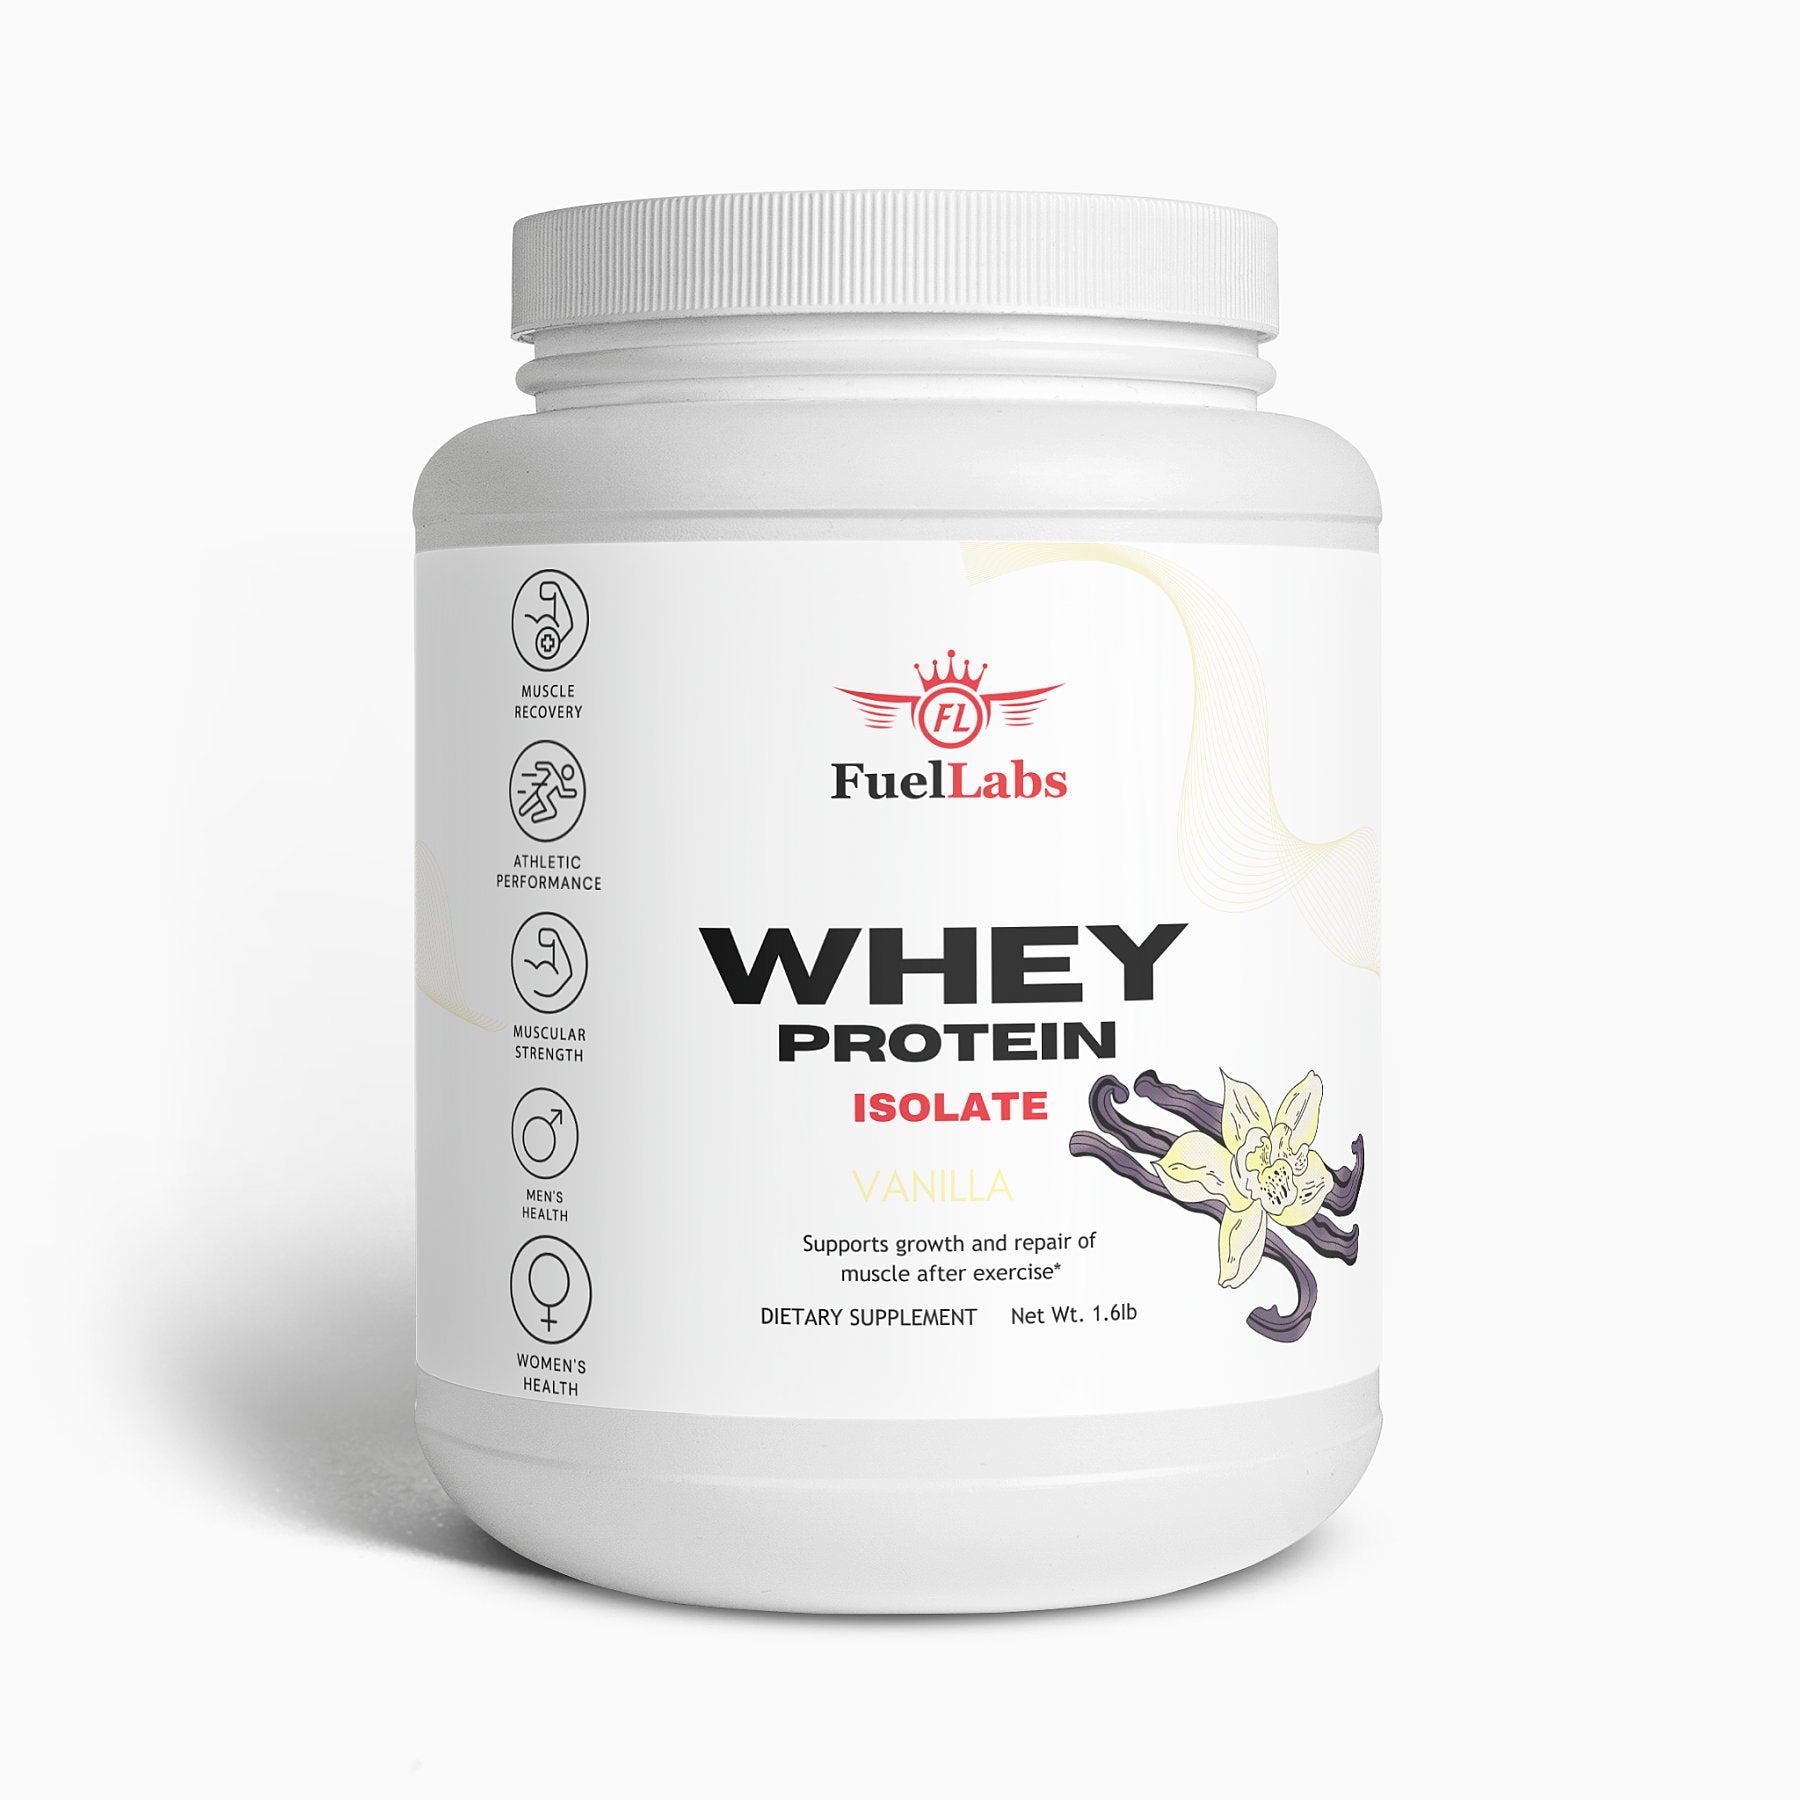 Whey Protein, Optimize Your Performance with High-Quality Whey Isolate.